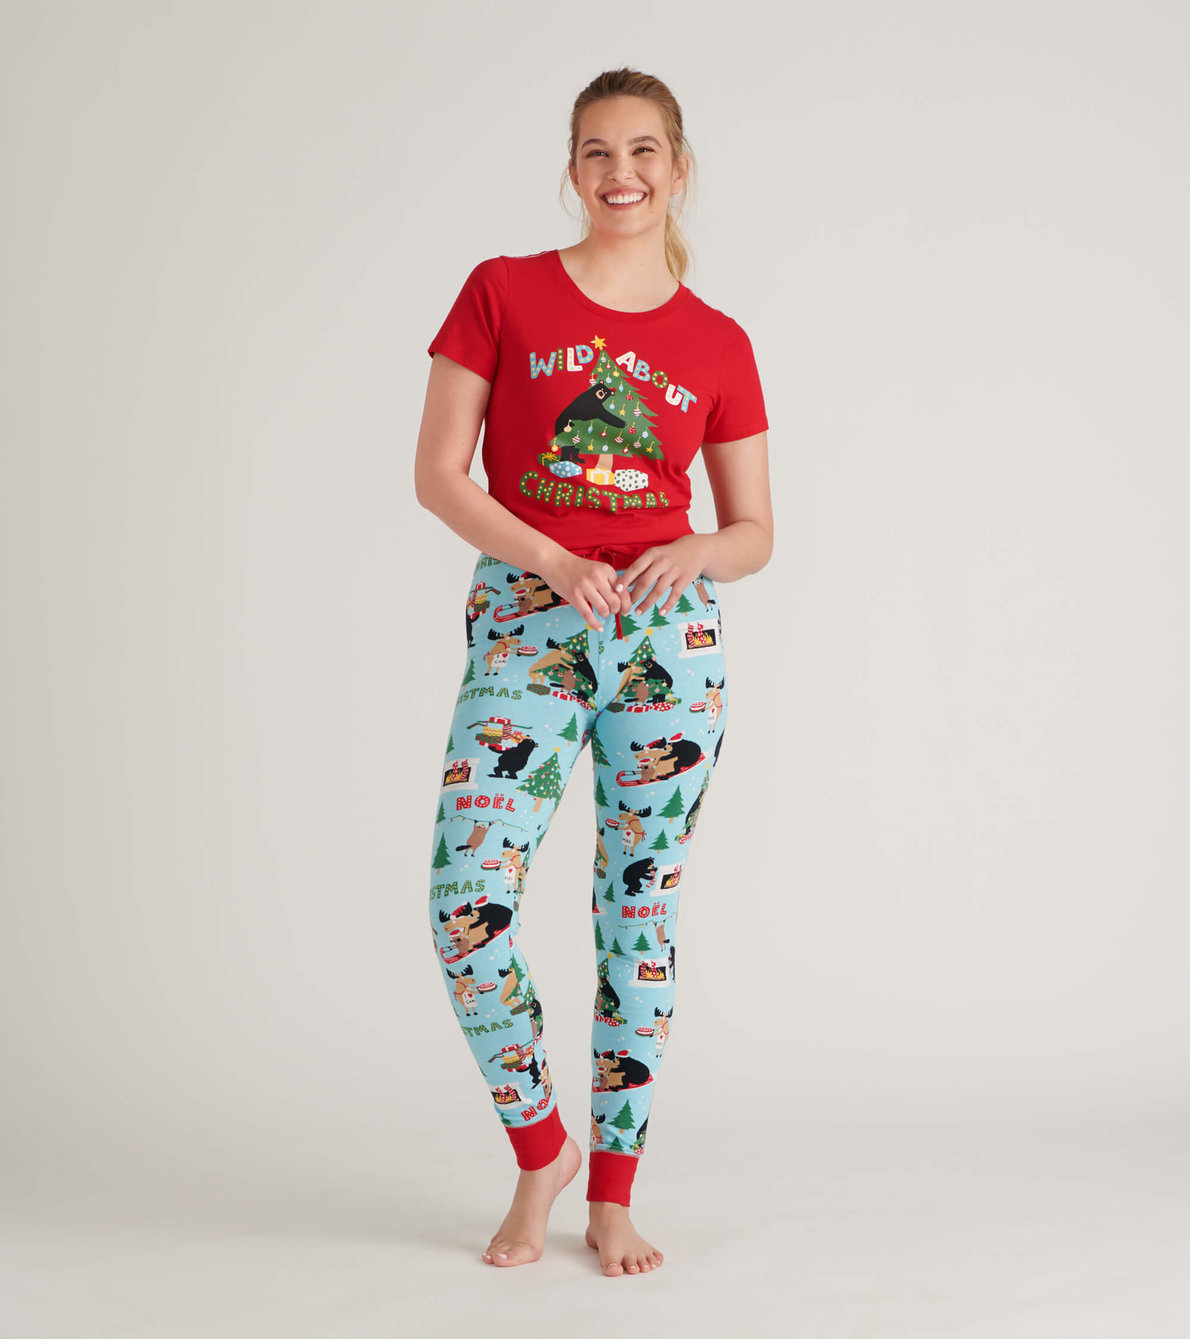 View larger image of Wild About Christmas Women's Pajama Tee